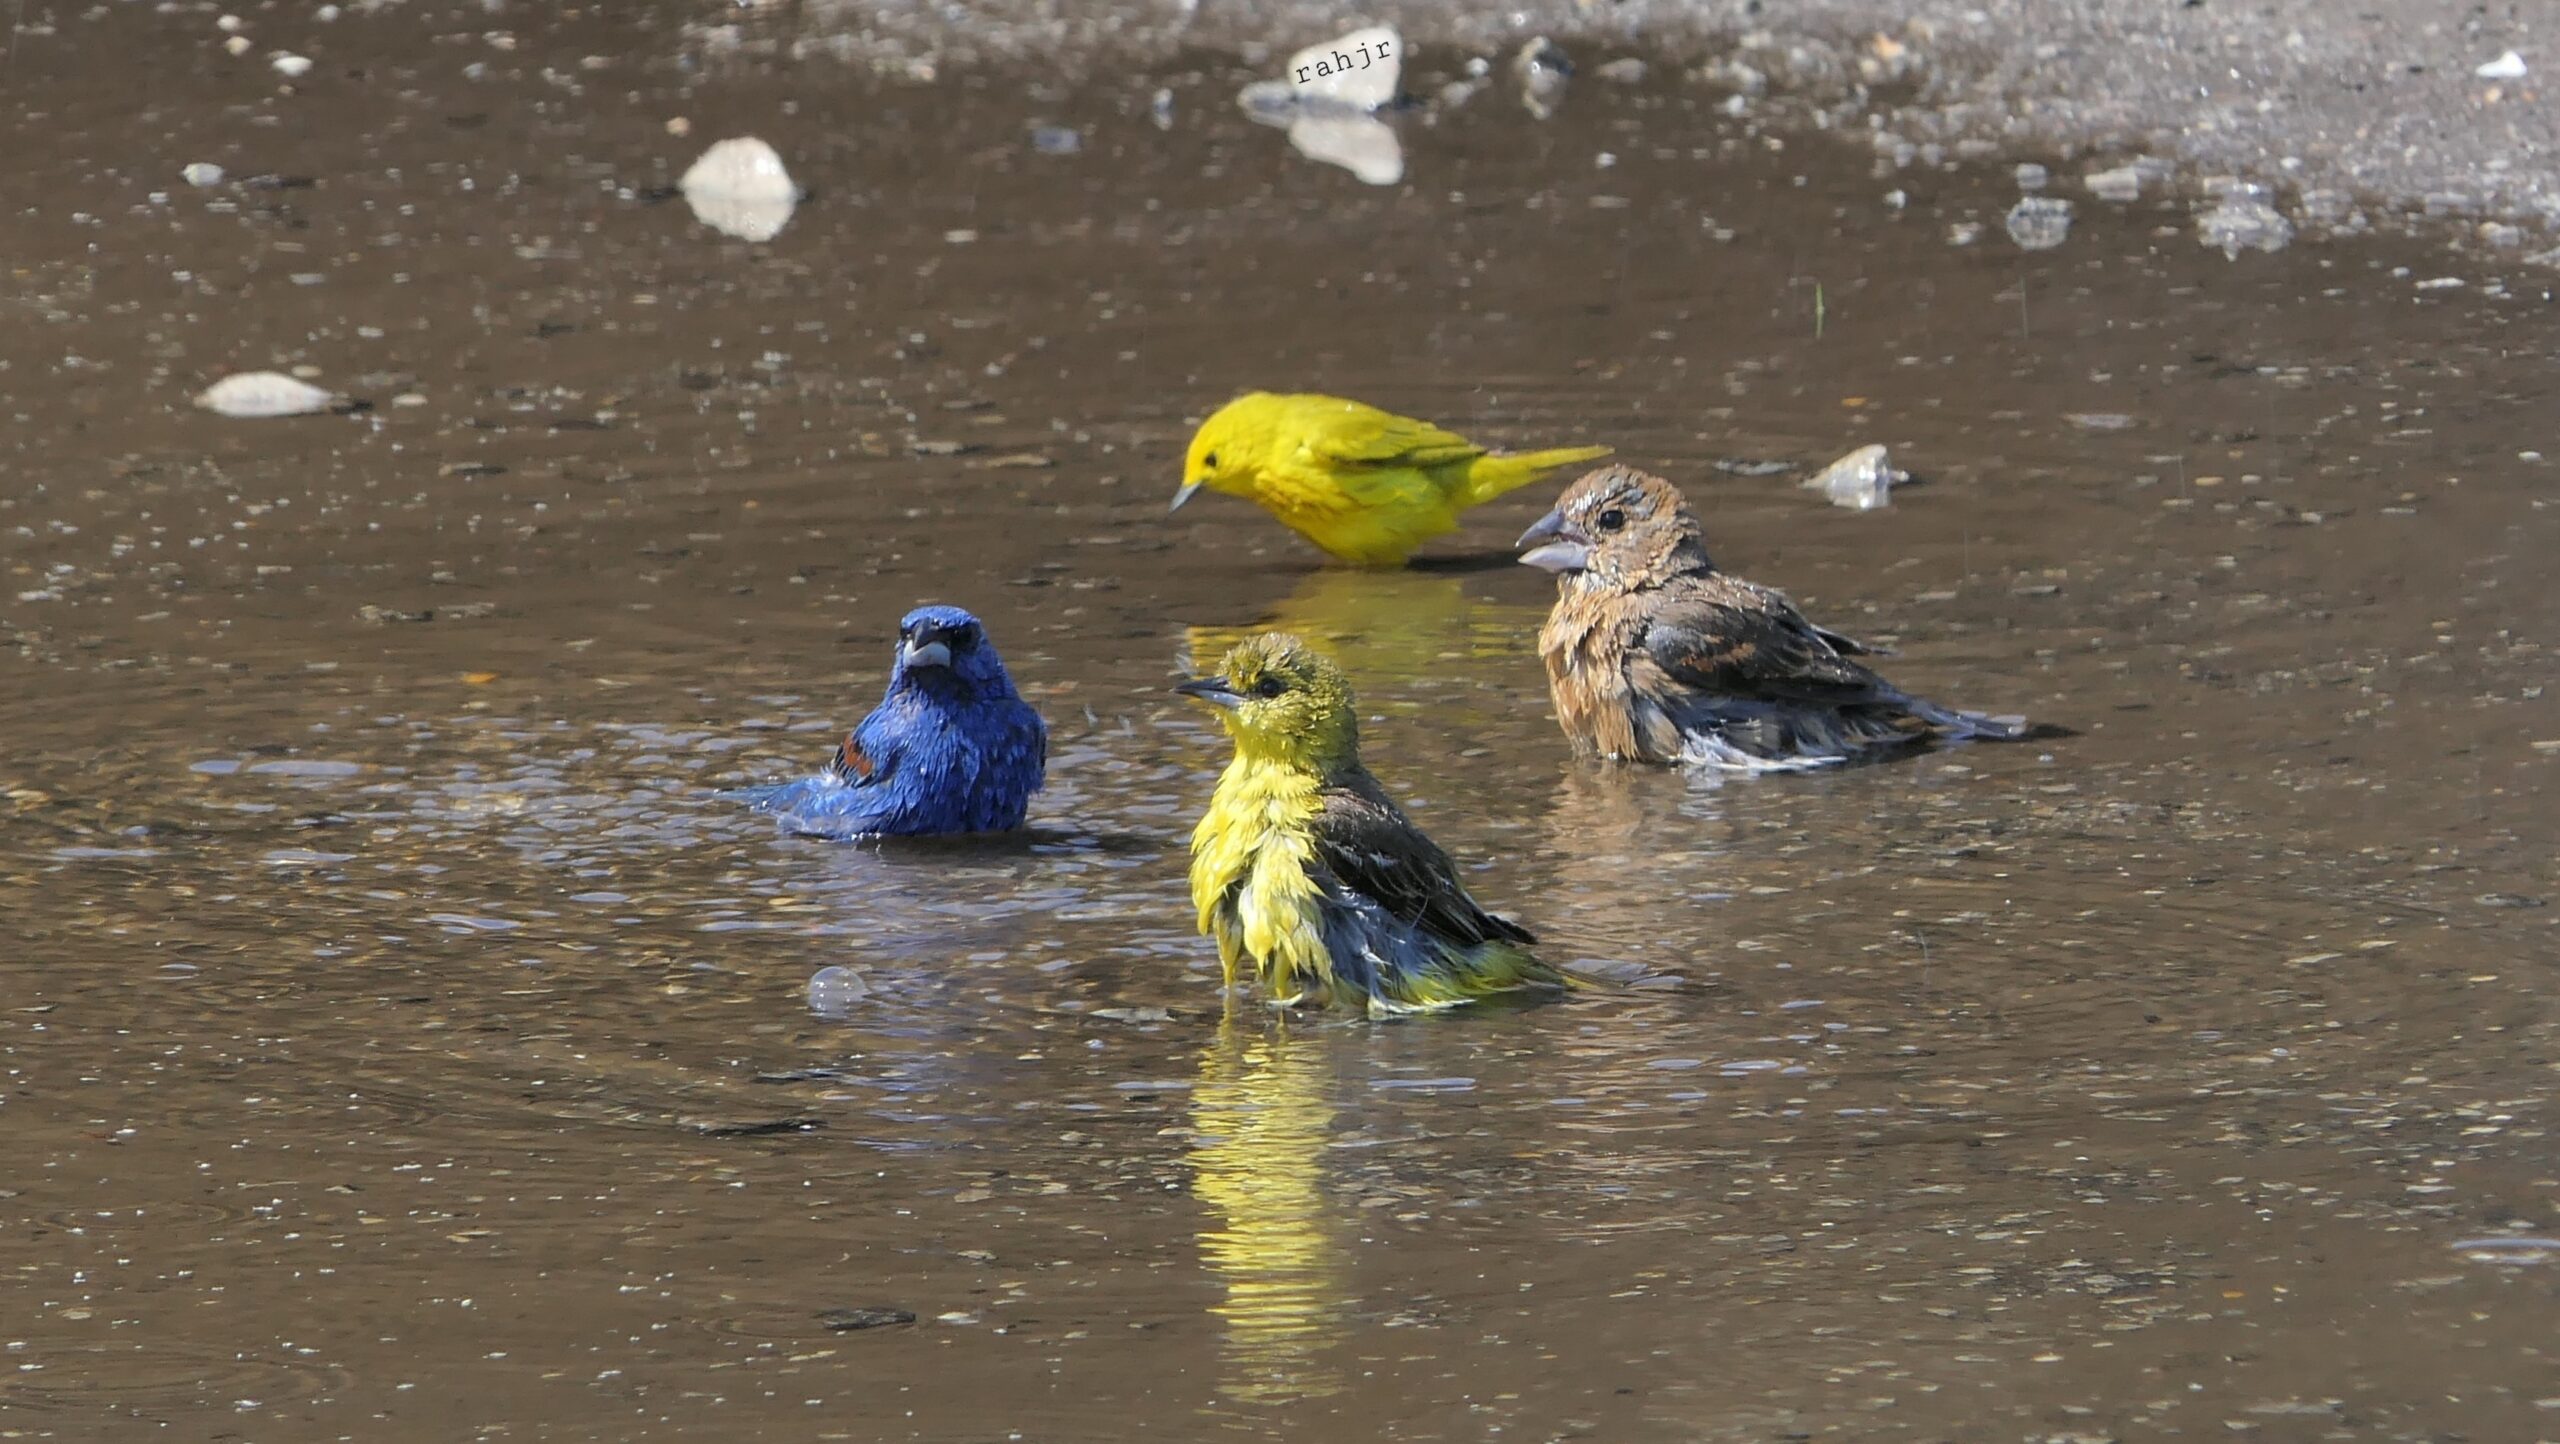 A yellow warbler, orchard oriole, blue grosbeaks and sparrow take a bath.